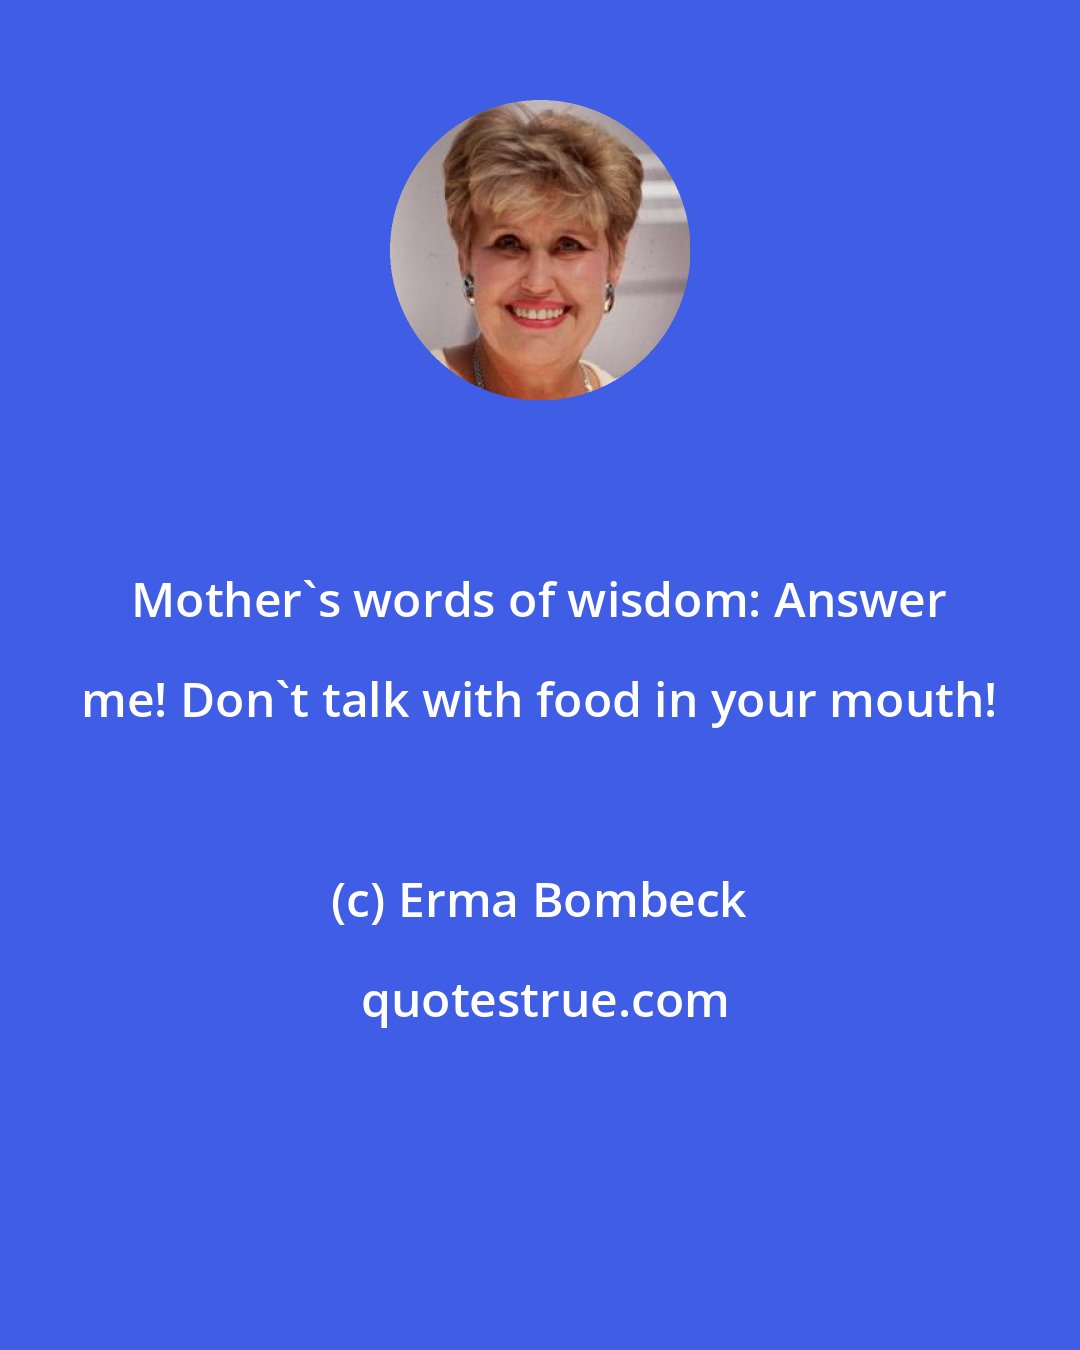 Erma Bombeck: Mother's words of wisdom: Answer me! Don't talk with food in your mouth!